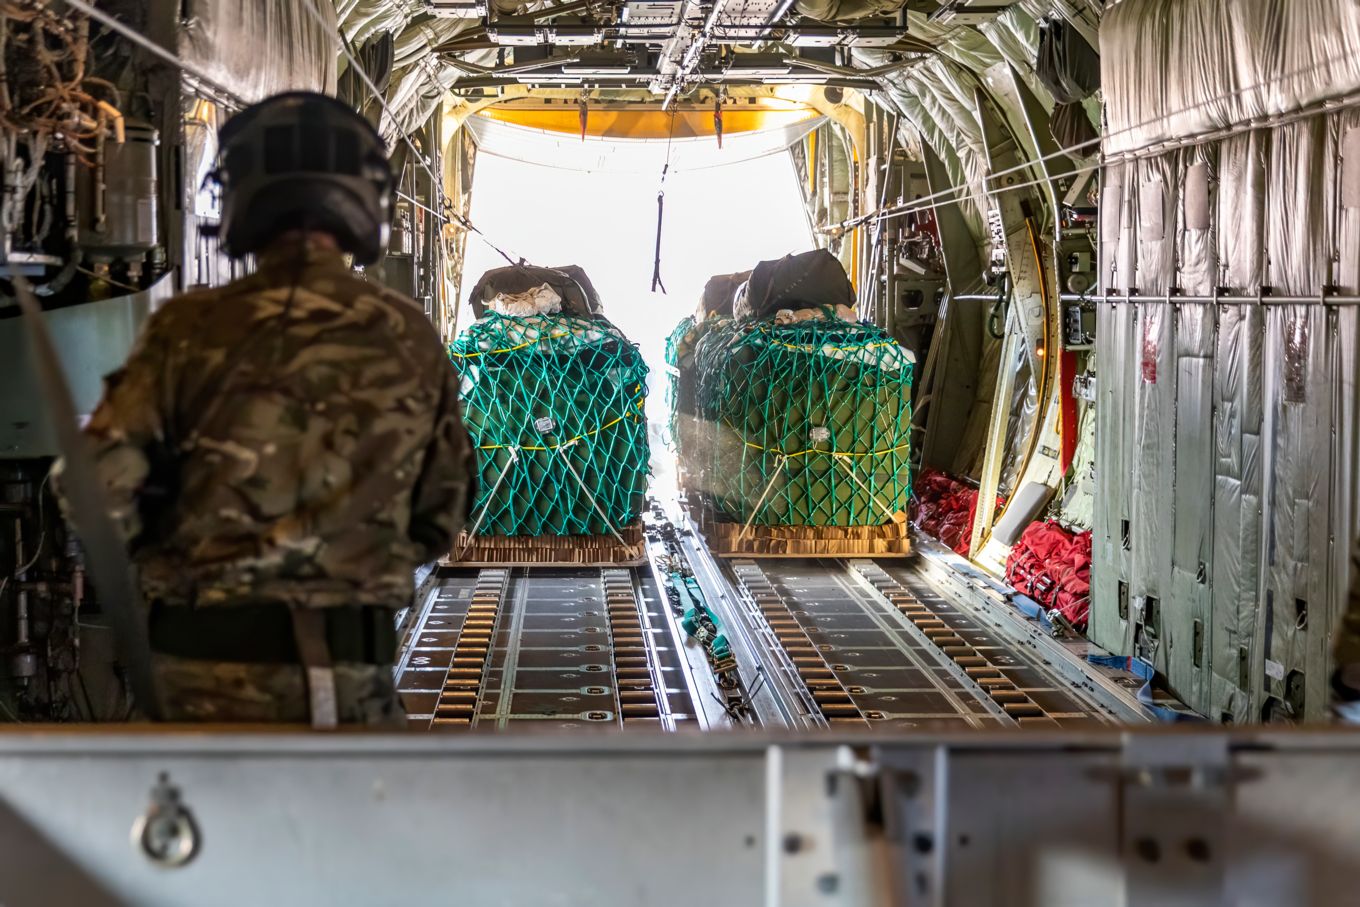 A second C-130J Hercules contained a series of cargo pallets of supplies which were also airdropped into the training area